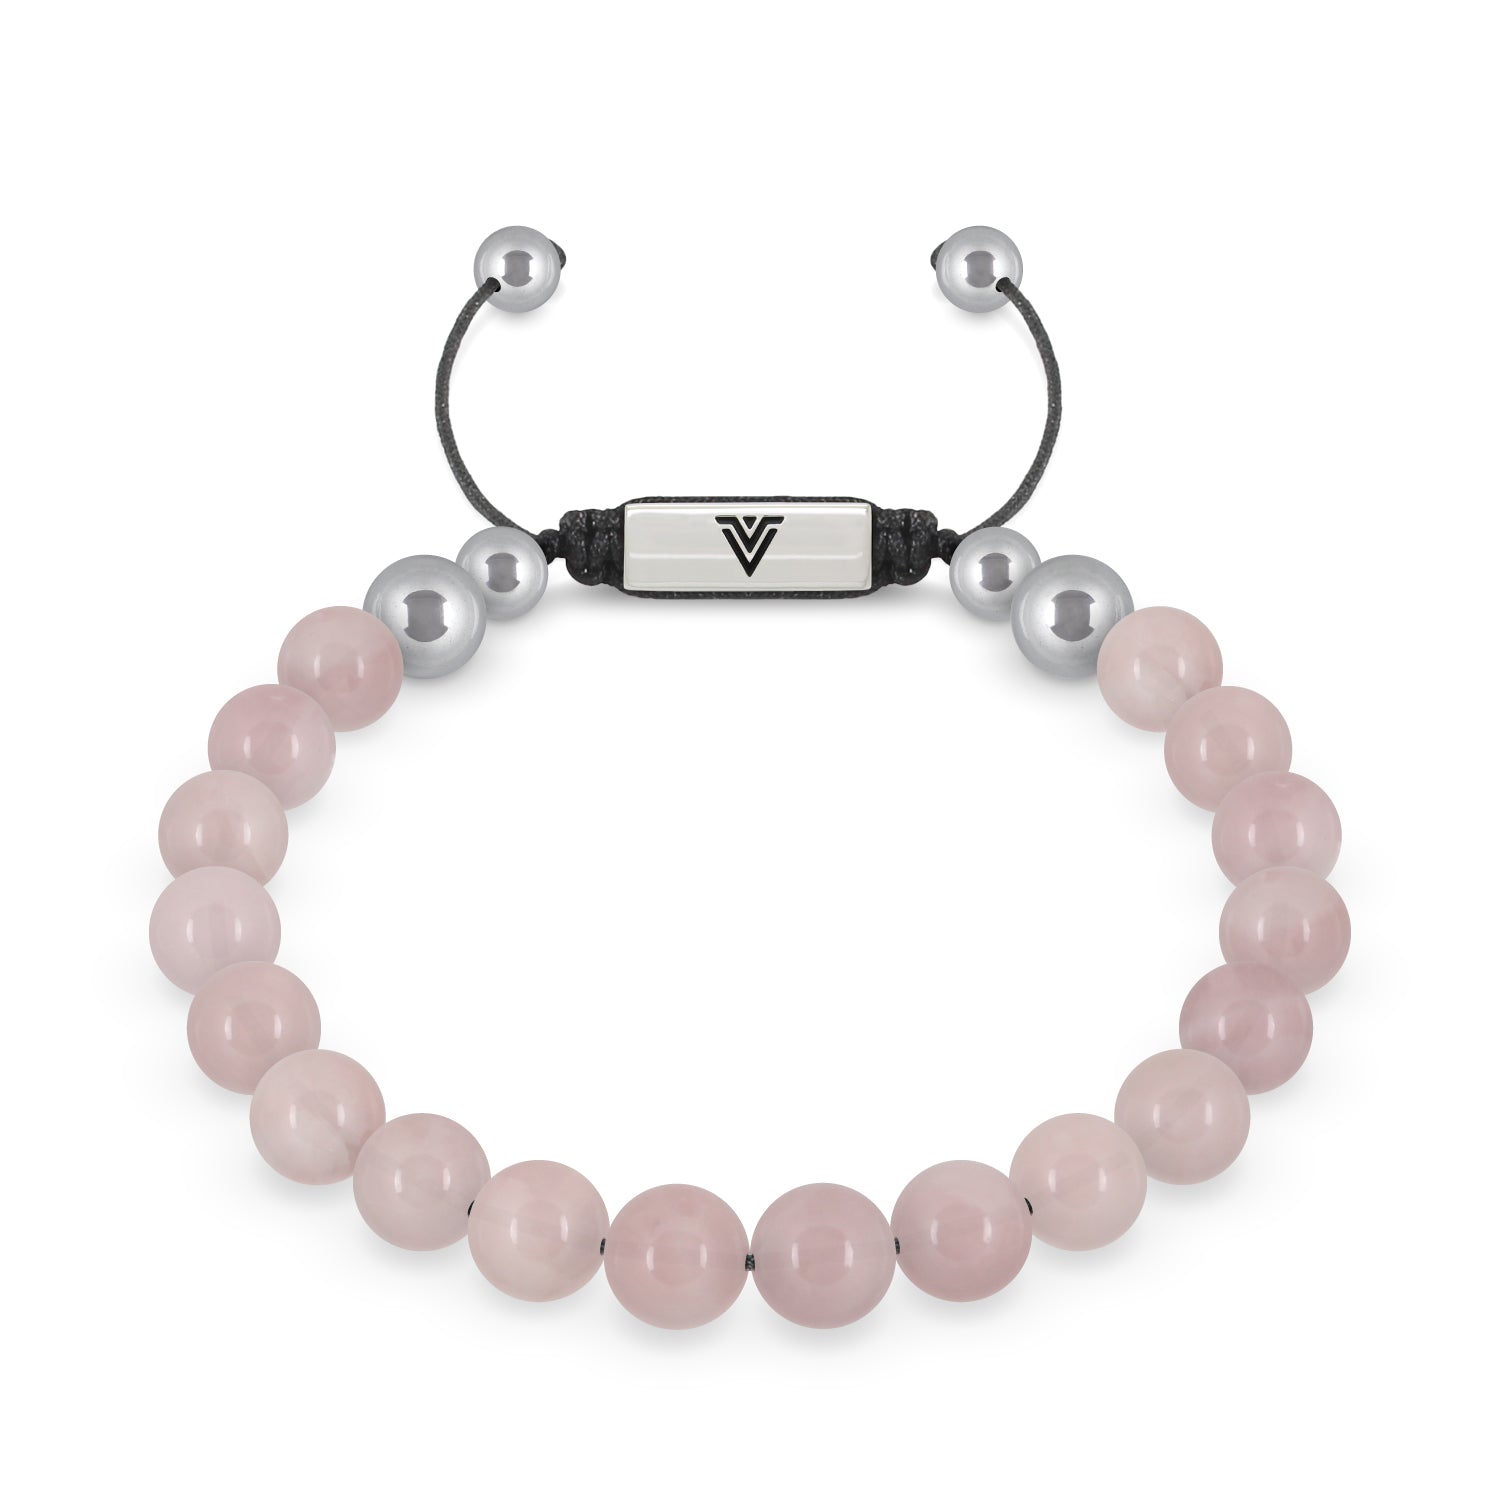 What Hand Should I Wear My Crystal Bracelet On? – The Crystal Avenues